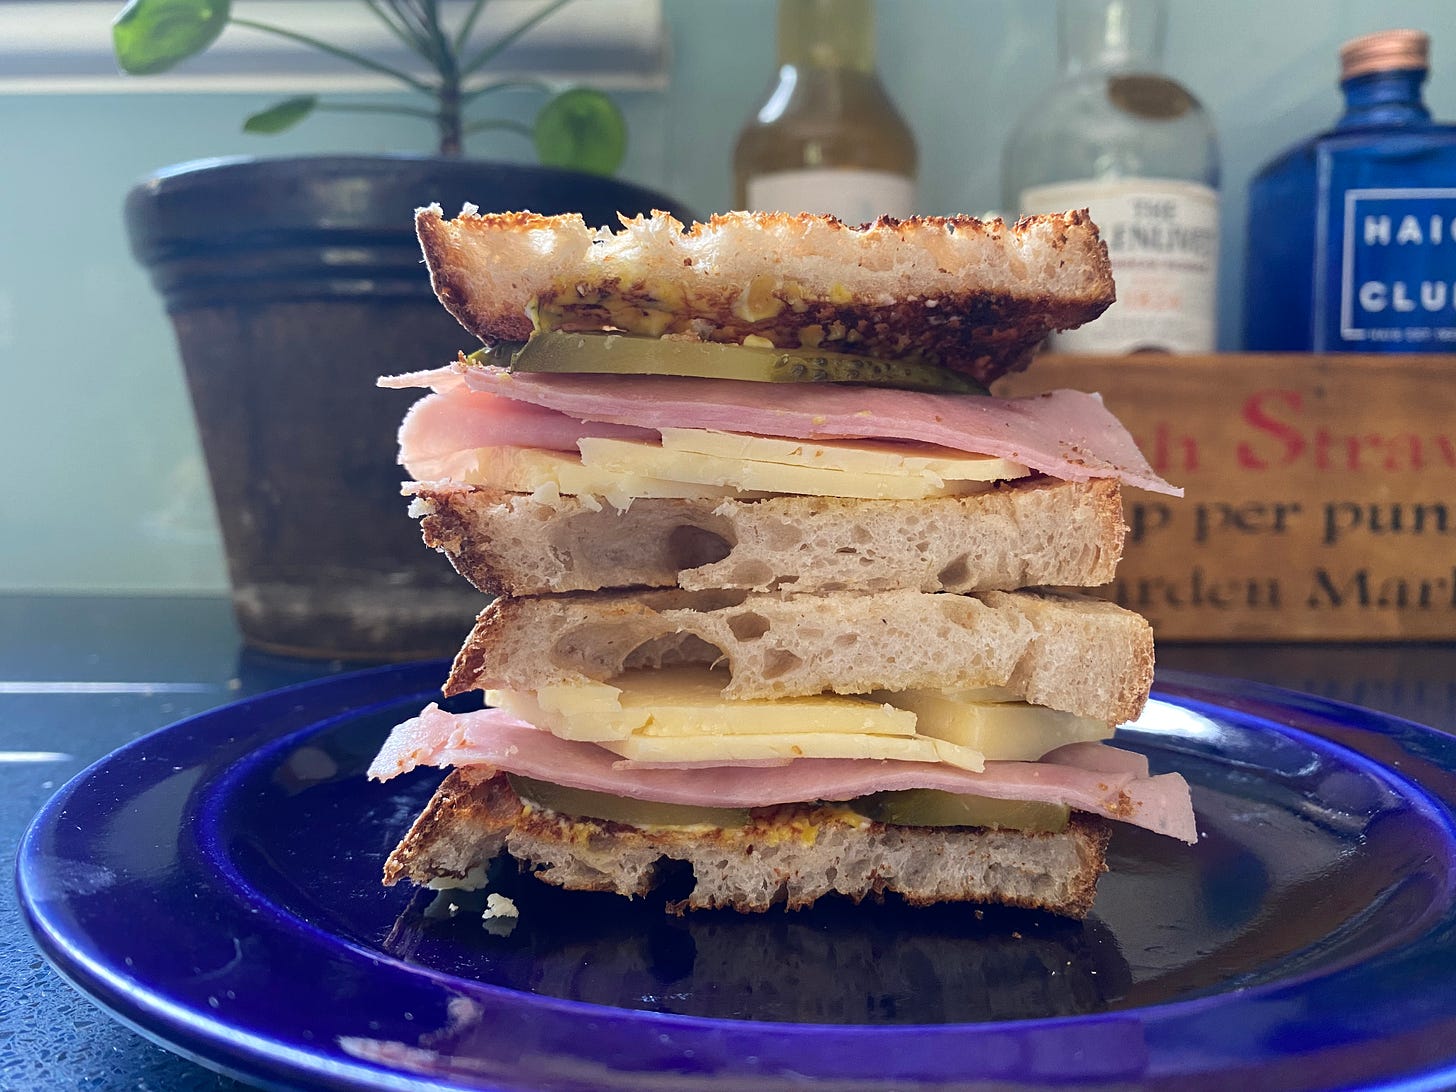 Cut-side of a sandwich showing layers of toasted bread, cheese, ham, gherkins and a hint of yellow mustard. Sandwich is served on a cobalt blue plate, a few drinks bottles and a potted jade plant are in the background